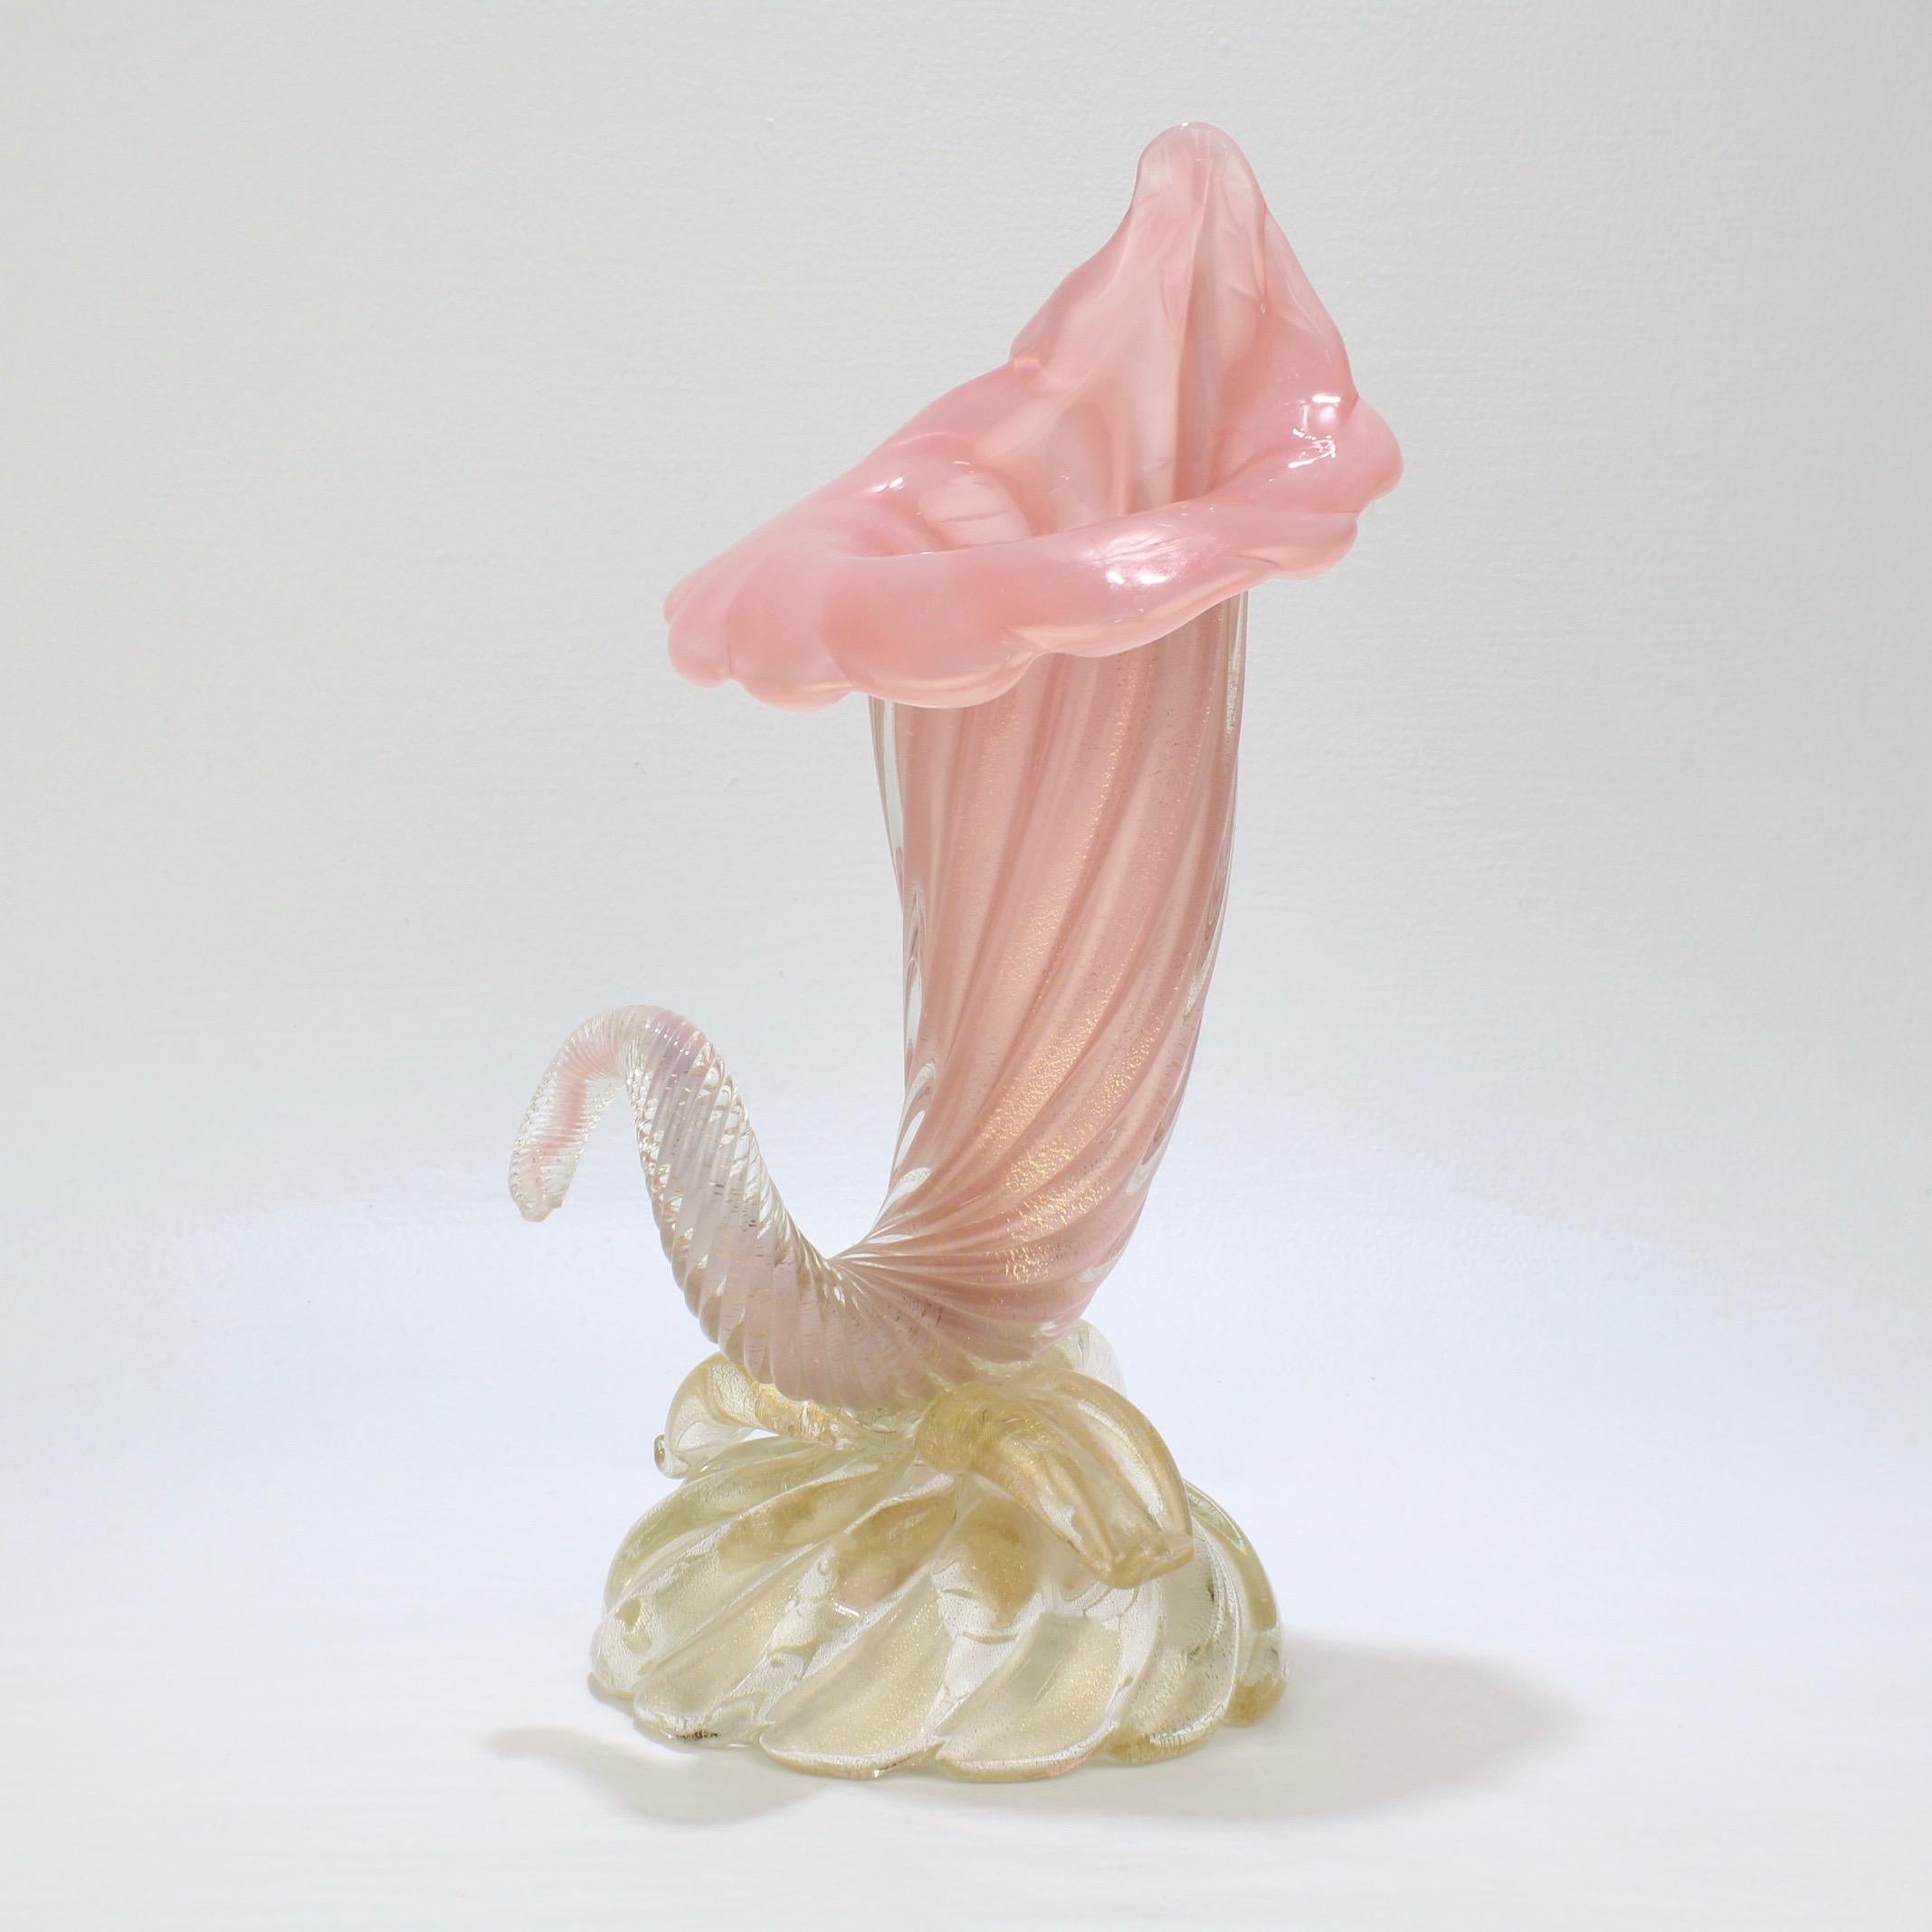 A very fine Mid-Century Modern Murano glass cornucopia vase by Archimede Seguso.

Made in the 'opalino a coste' technique - with a cornucopia top consisting of pink opalescent glass supported on a clear base with gold inclusions